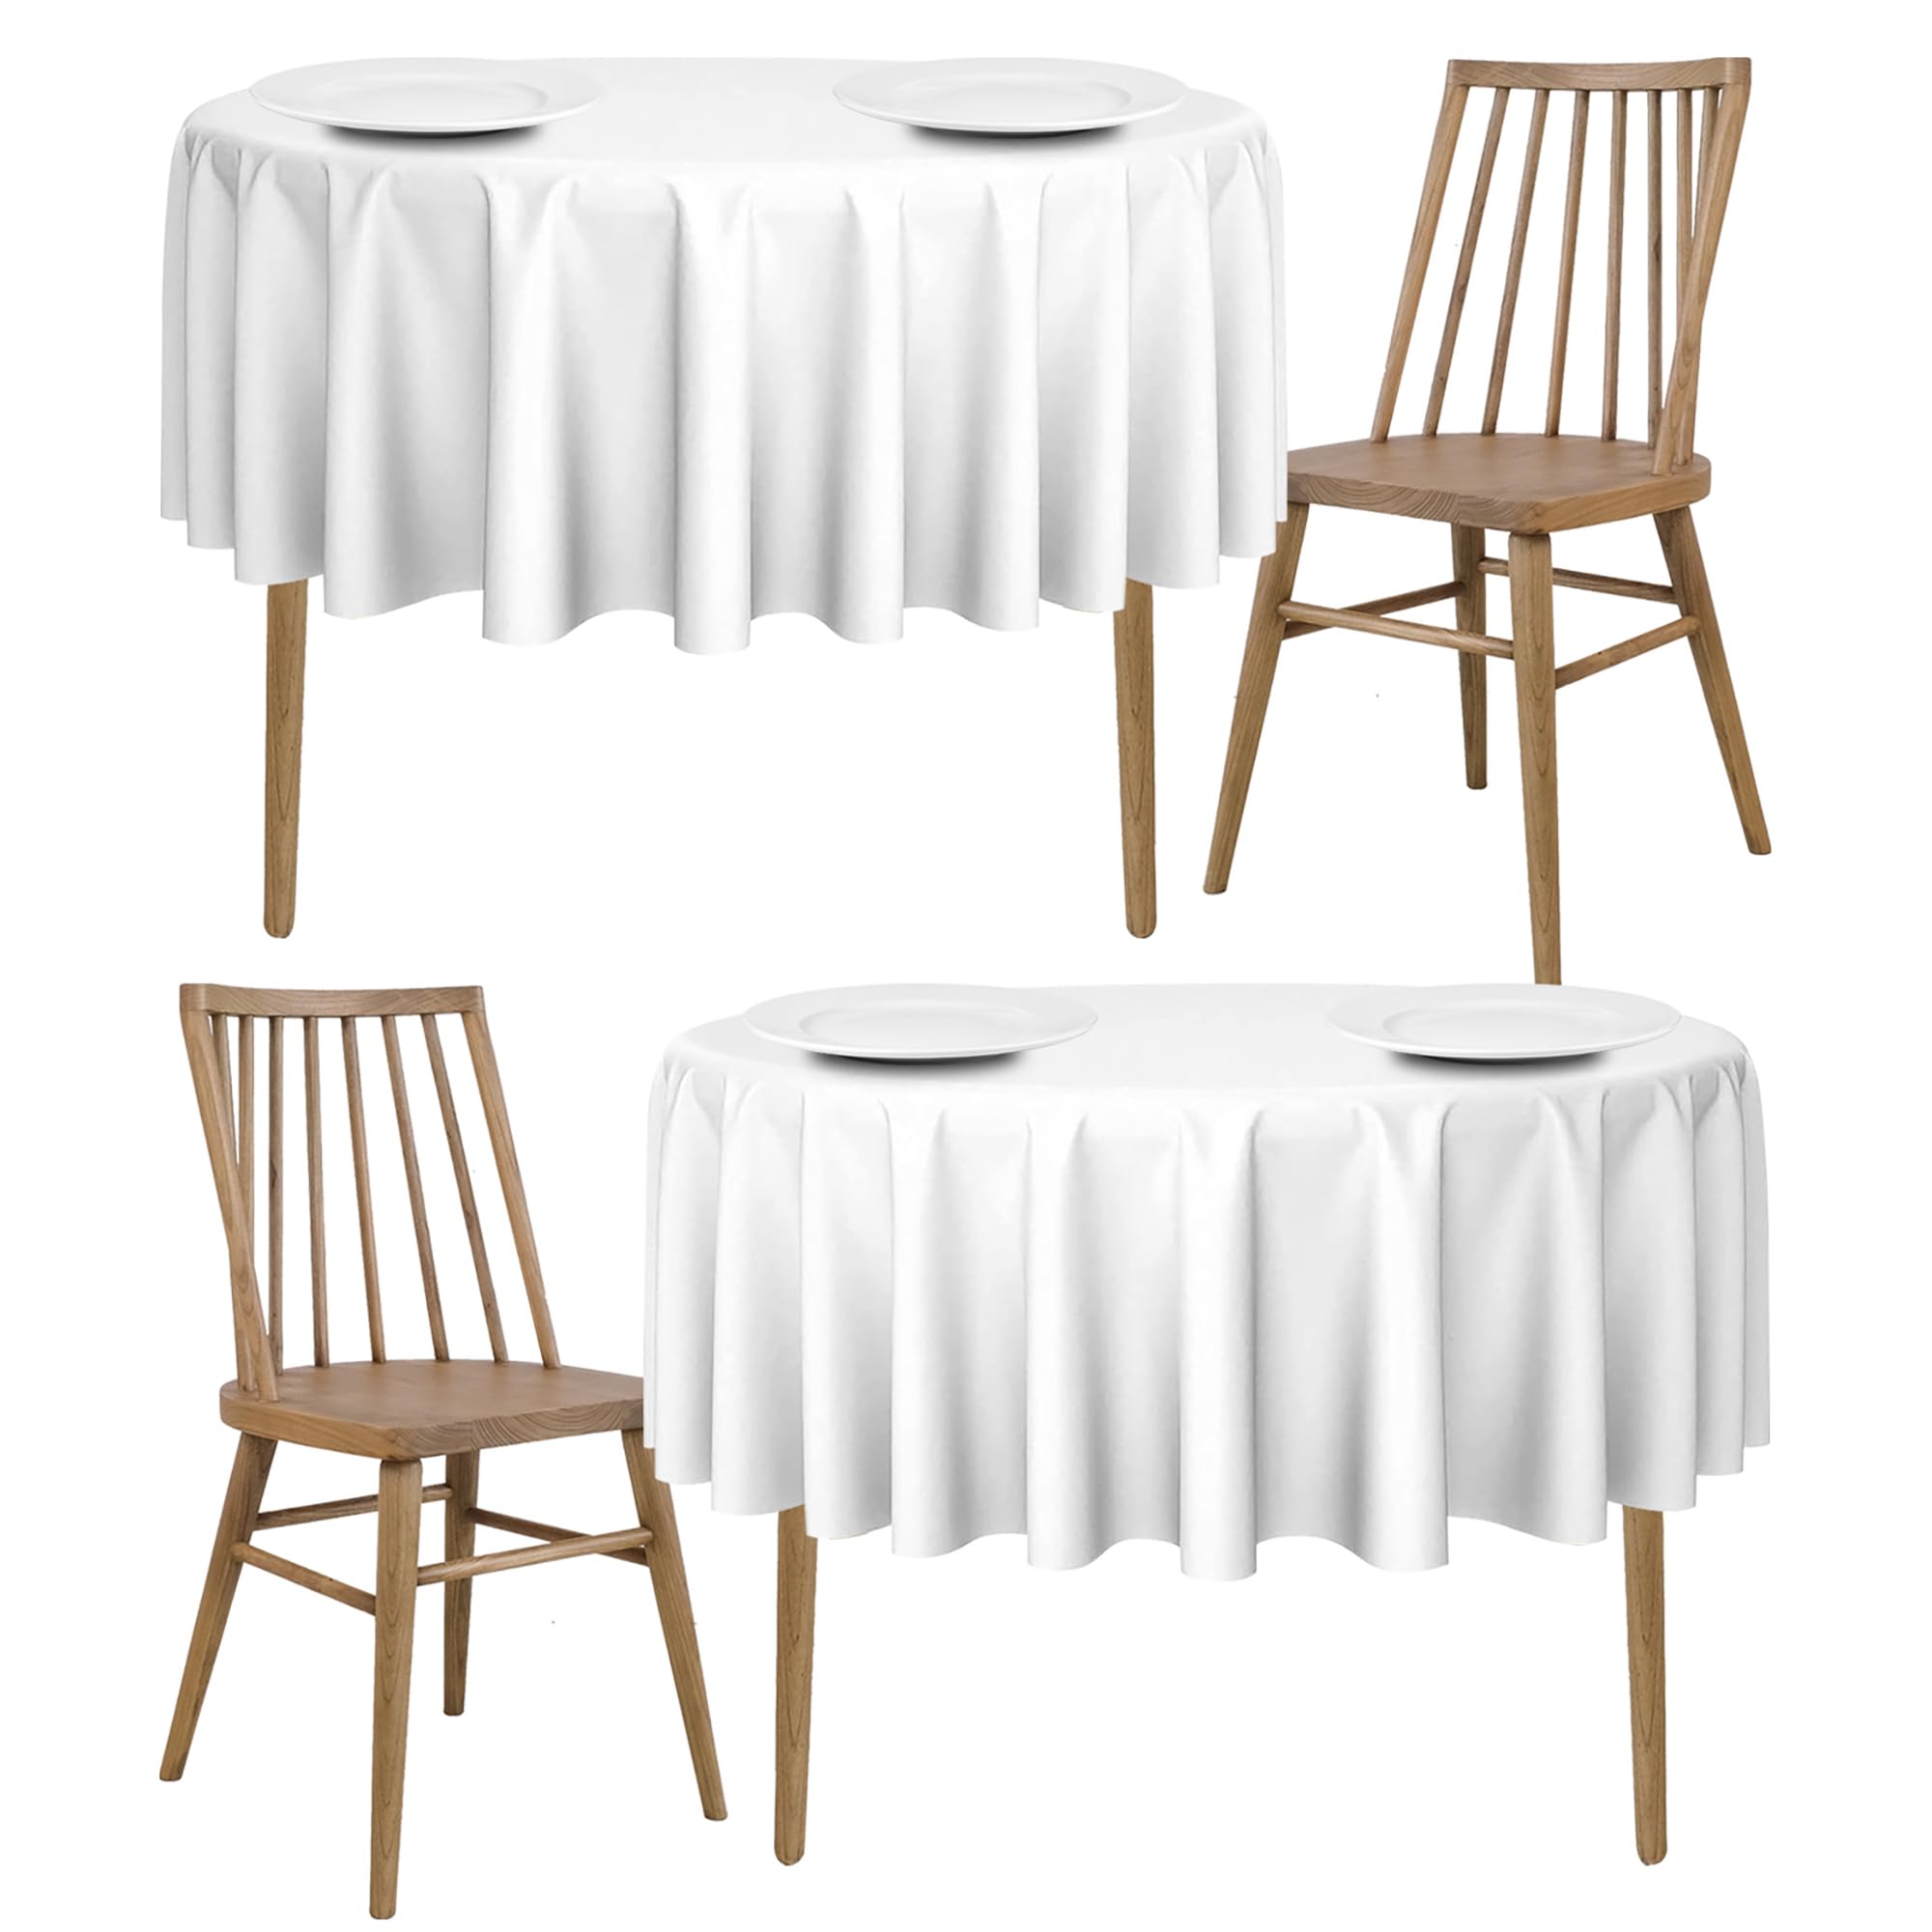 [2 Pack] 70, 90, 108, 120" Round Premium Tablecloths for Wedding | Banquet | Restaurant | Washable Fabric Table Cloth  - Very Good